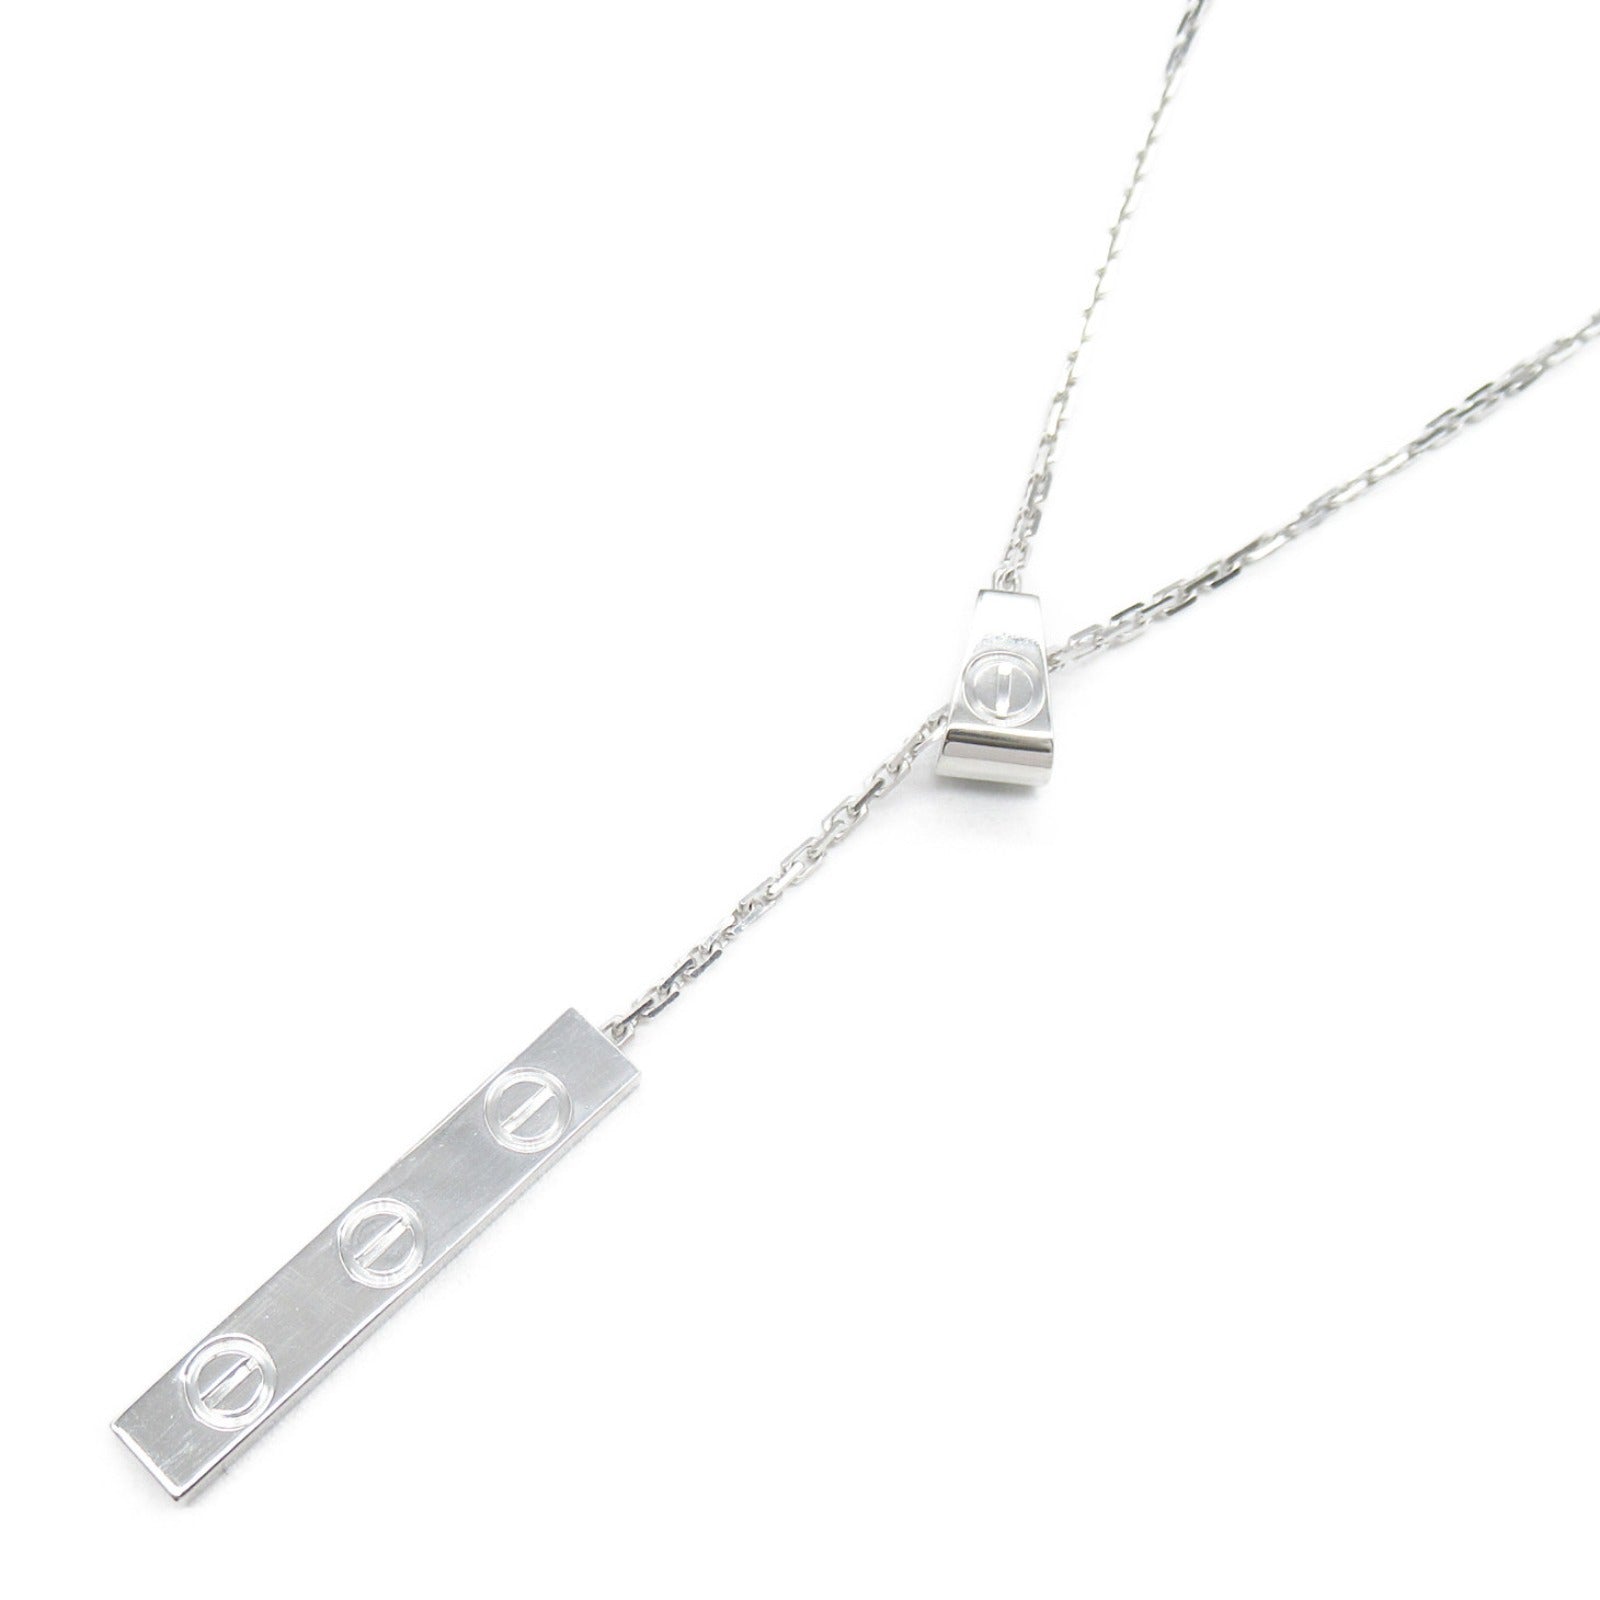 Cartier Cartier Y-shaped necklace necklace jewelry K18WG (White G)  Silver